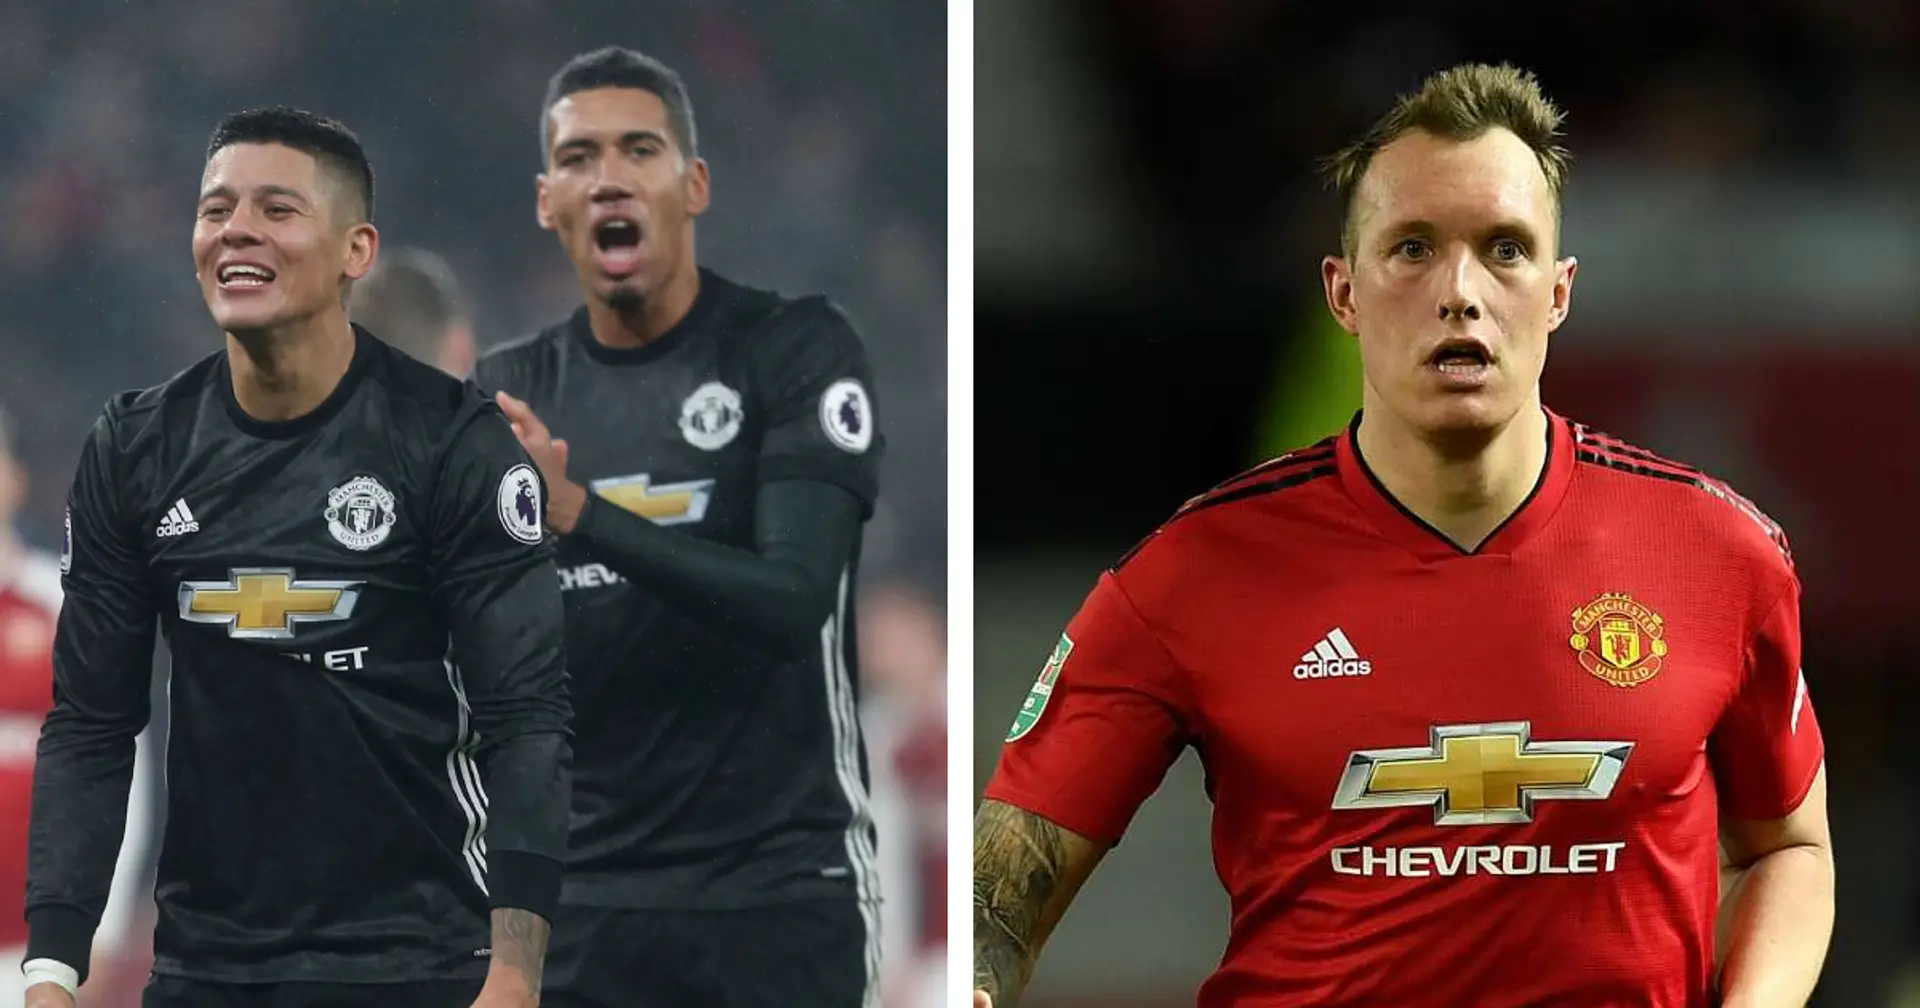 United aiming to sell Rojo, Smalling this summer and Jones next year (reliability: 3 stars)